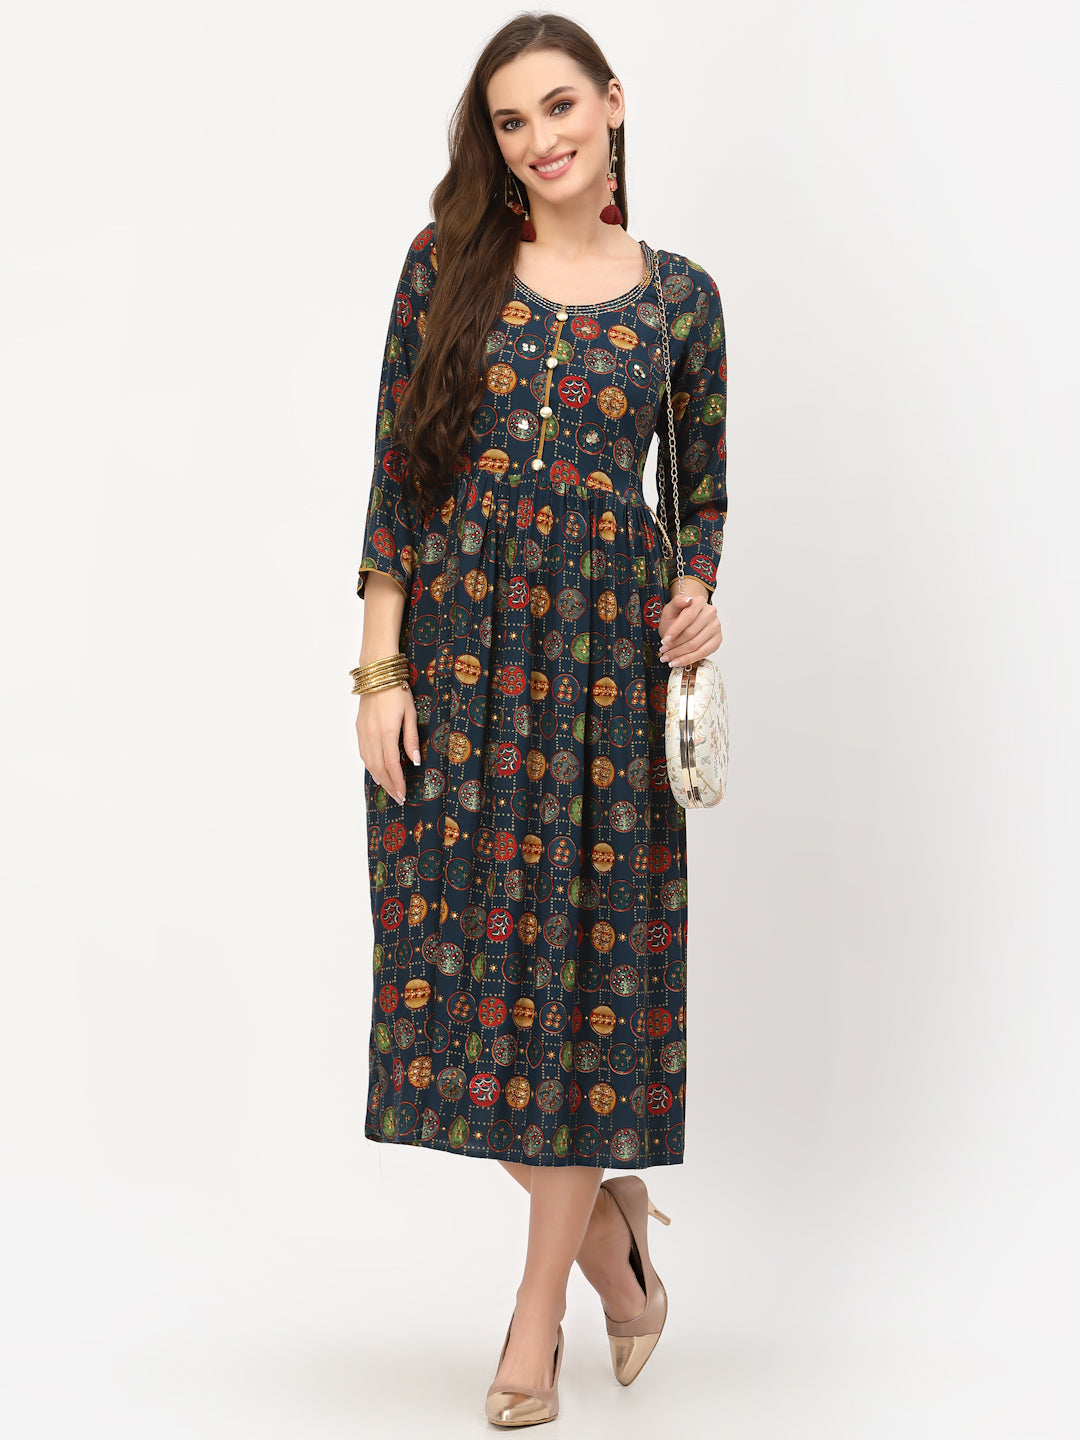 Navy Blue Fit & Flared Printed Dress - ARH333BE